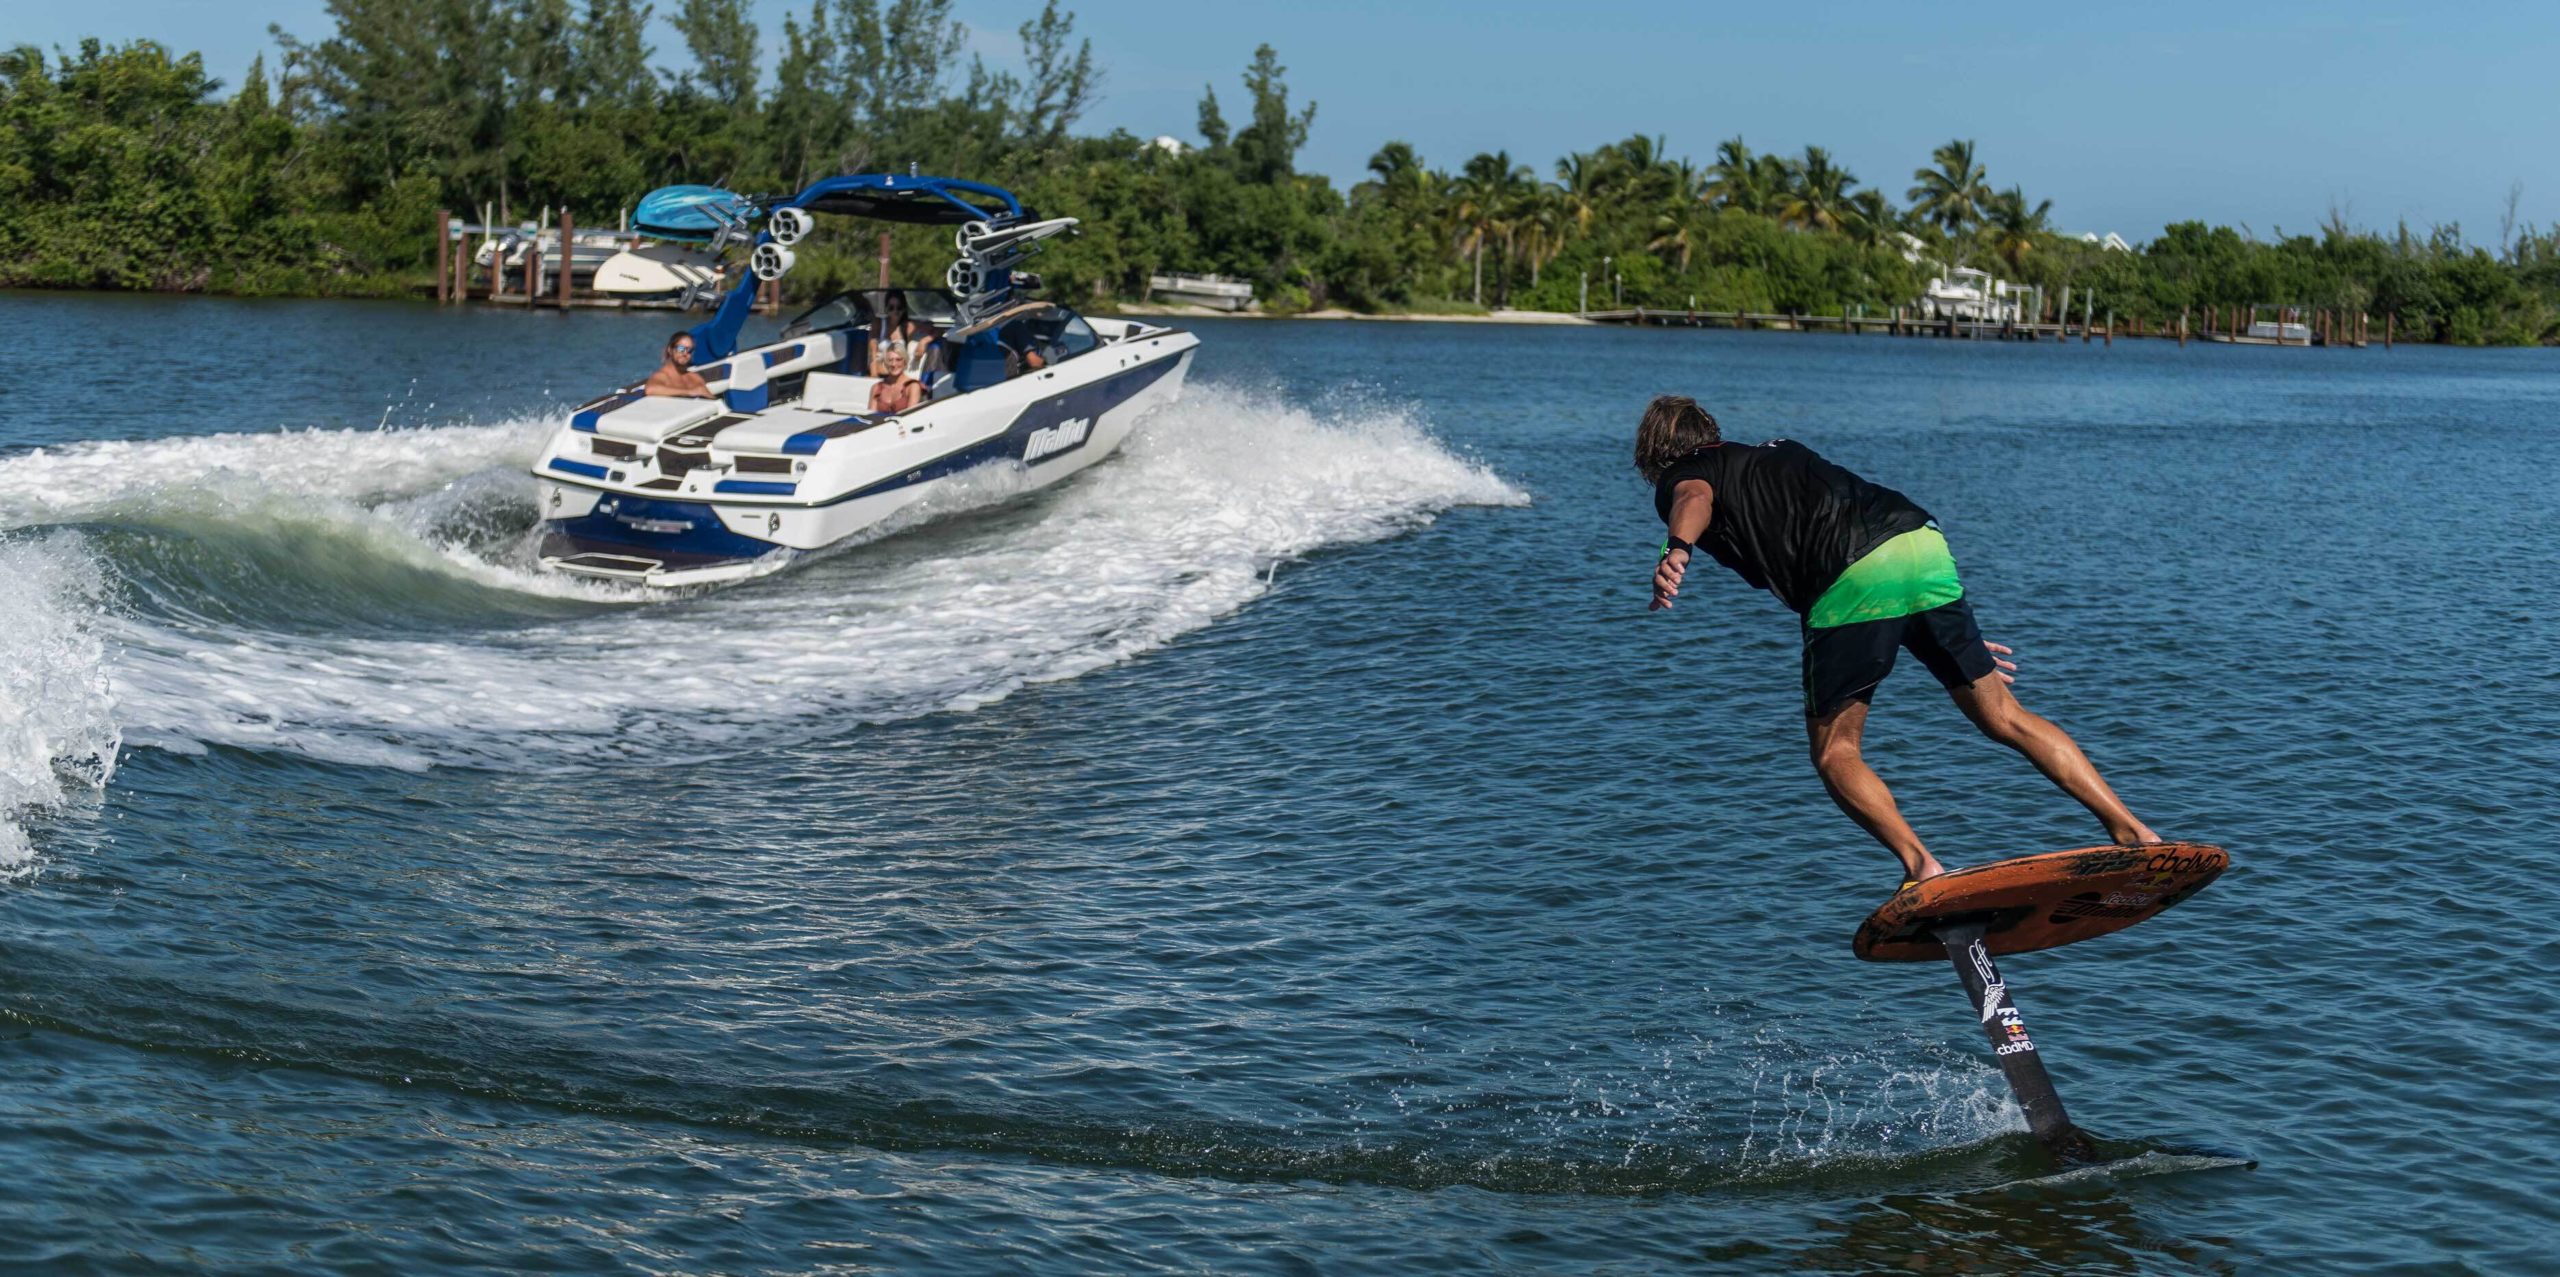 Ready to rise above the chop?  Take wake surfing to the next level...   Let us equip your water vessel with a high quality carbon surf foil, or a prong surf-foils for dock starts.  Discounts available after receiving a lesson.  